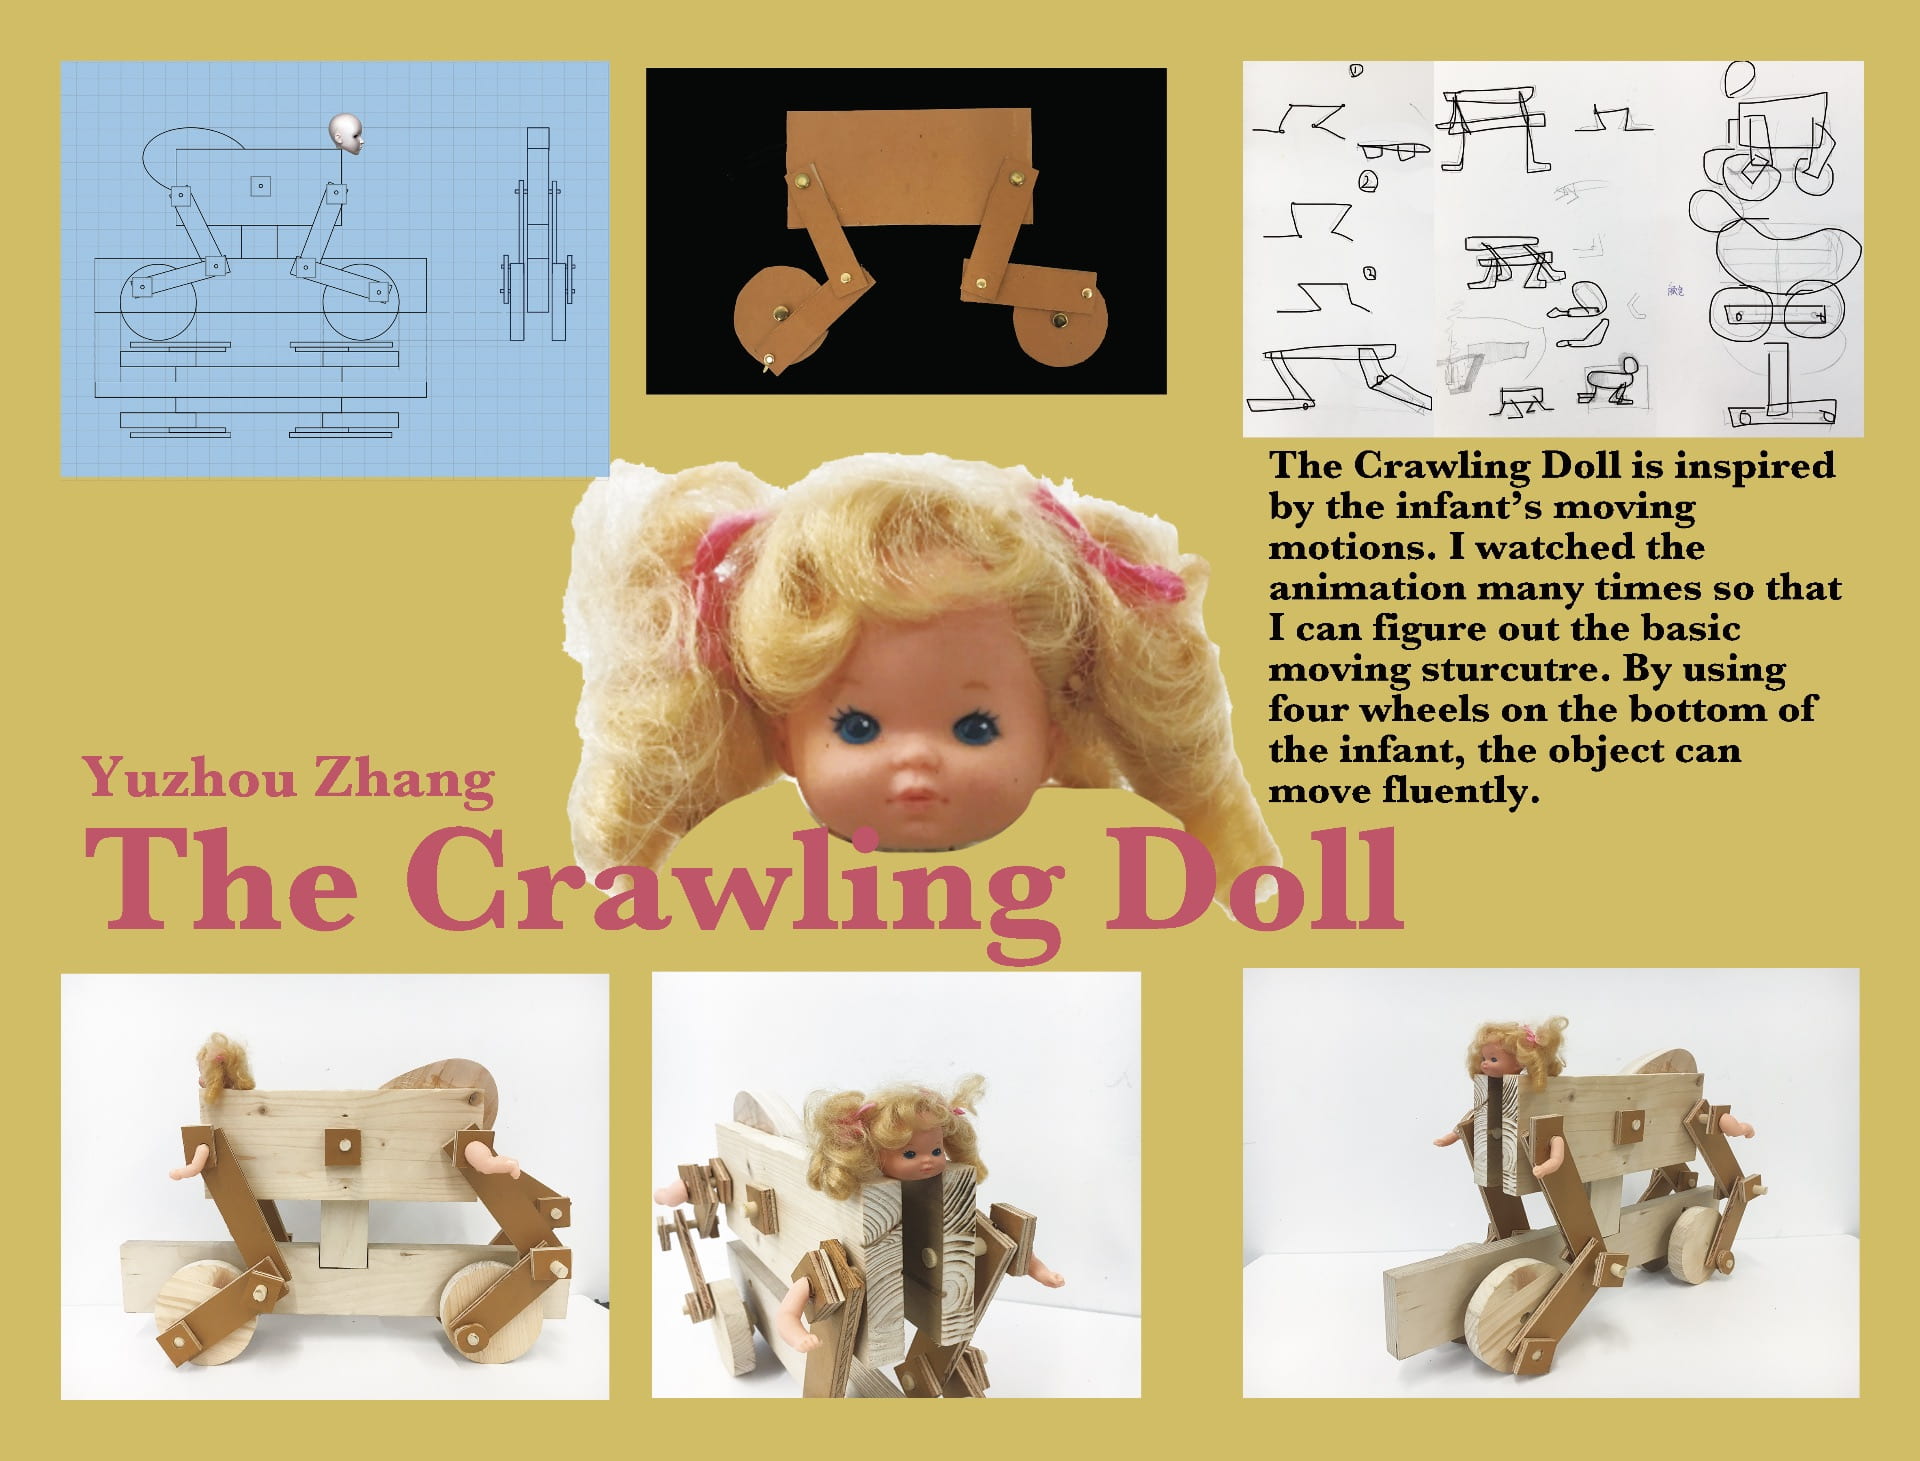 Space: “The Crawling Doll”: a wooden handcraft used multiple mechanisms